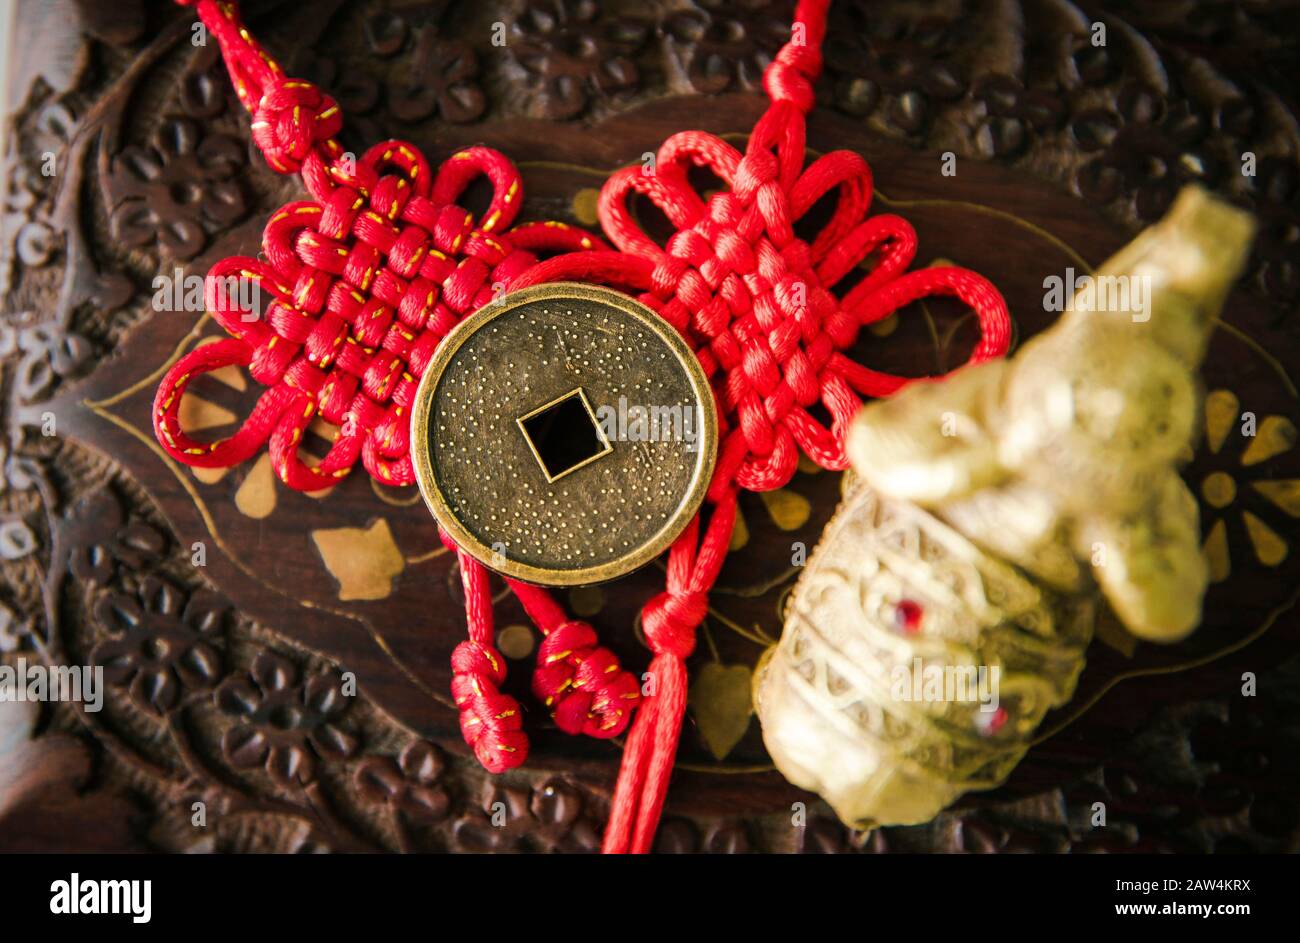 Chinese coin used as Feng Shui money cures attracting the energy of wealth and money concept. Wooden oriental background. Stock Photo